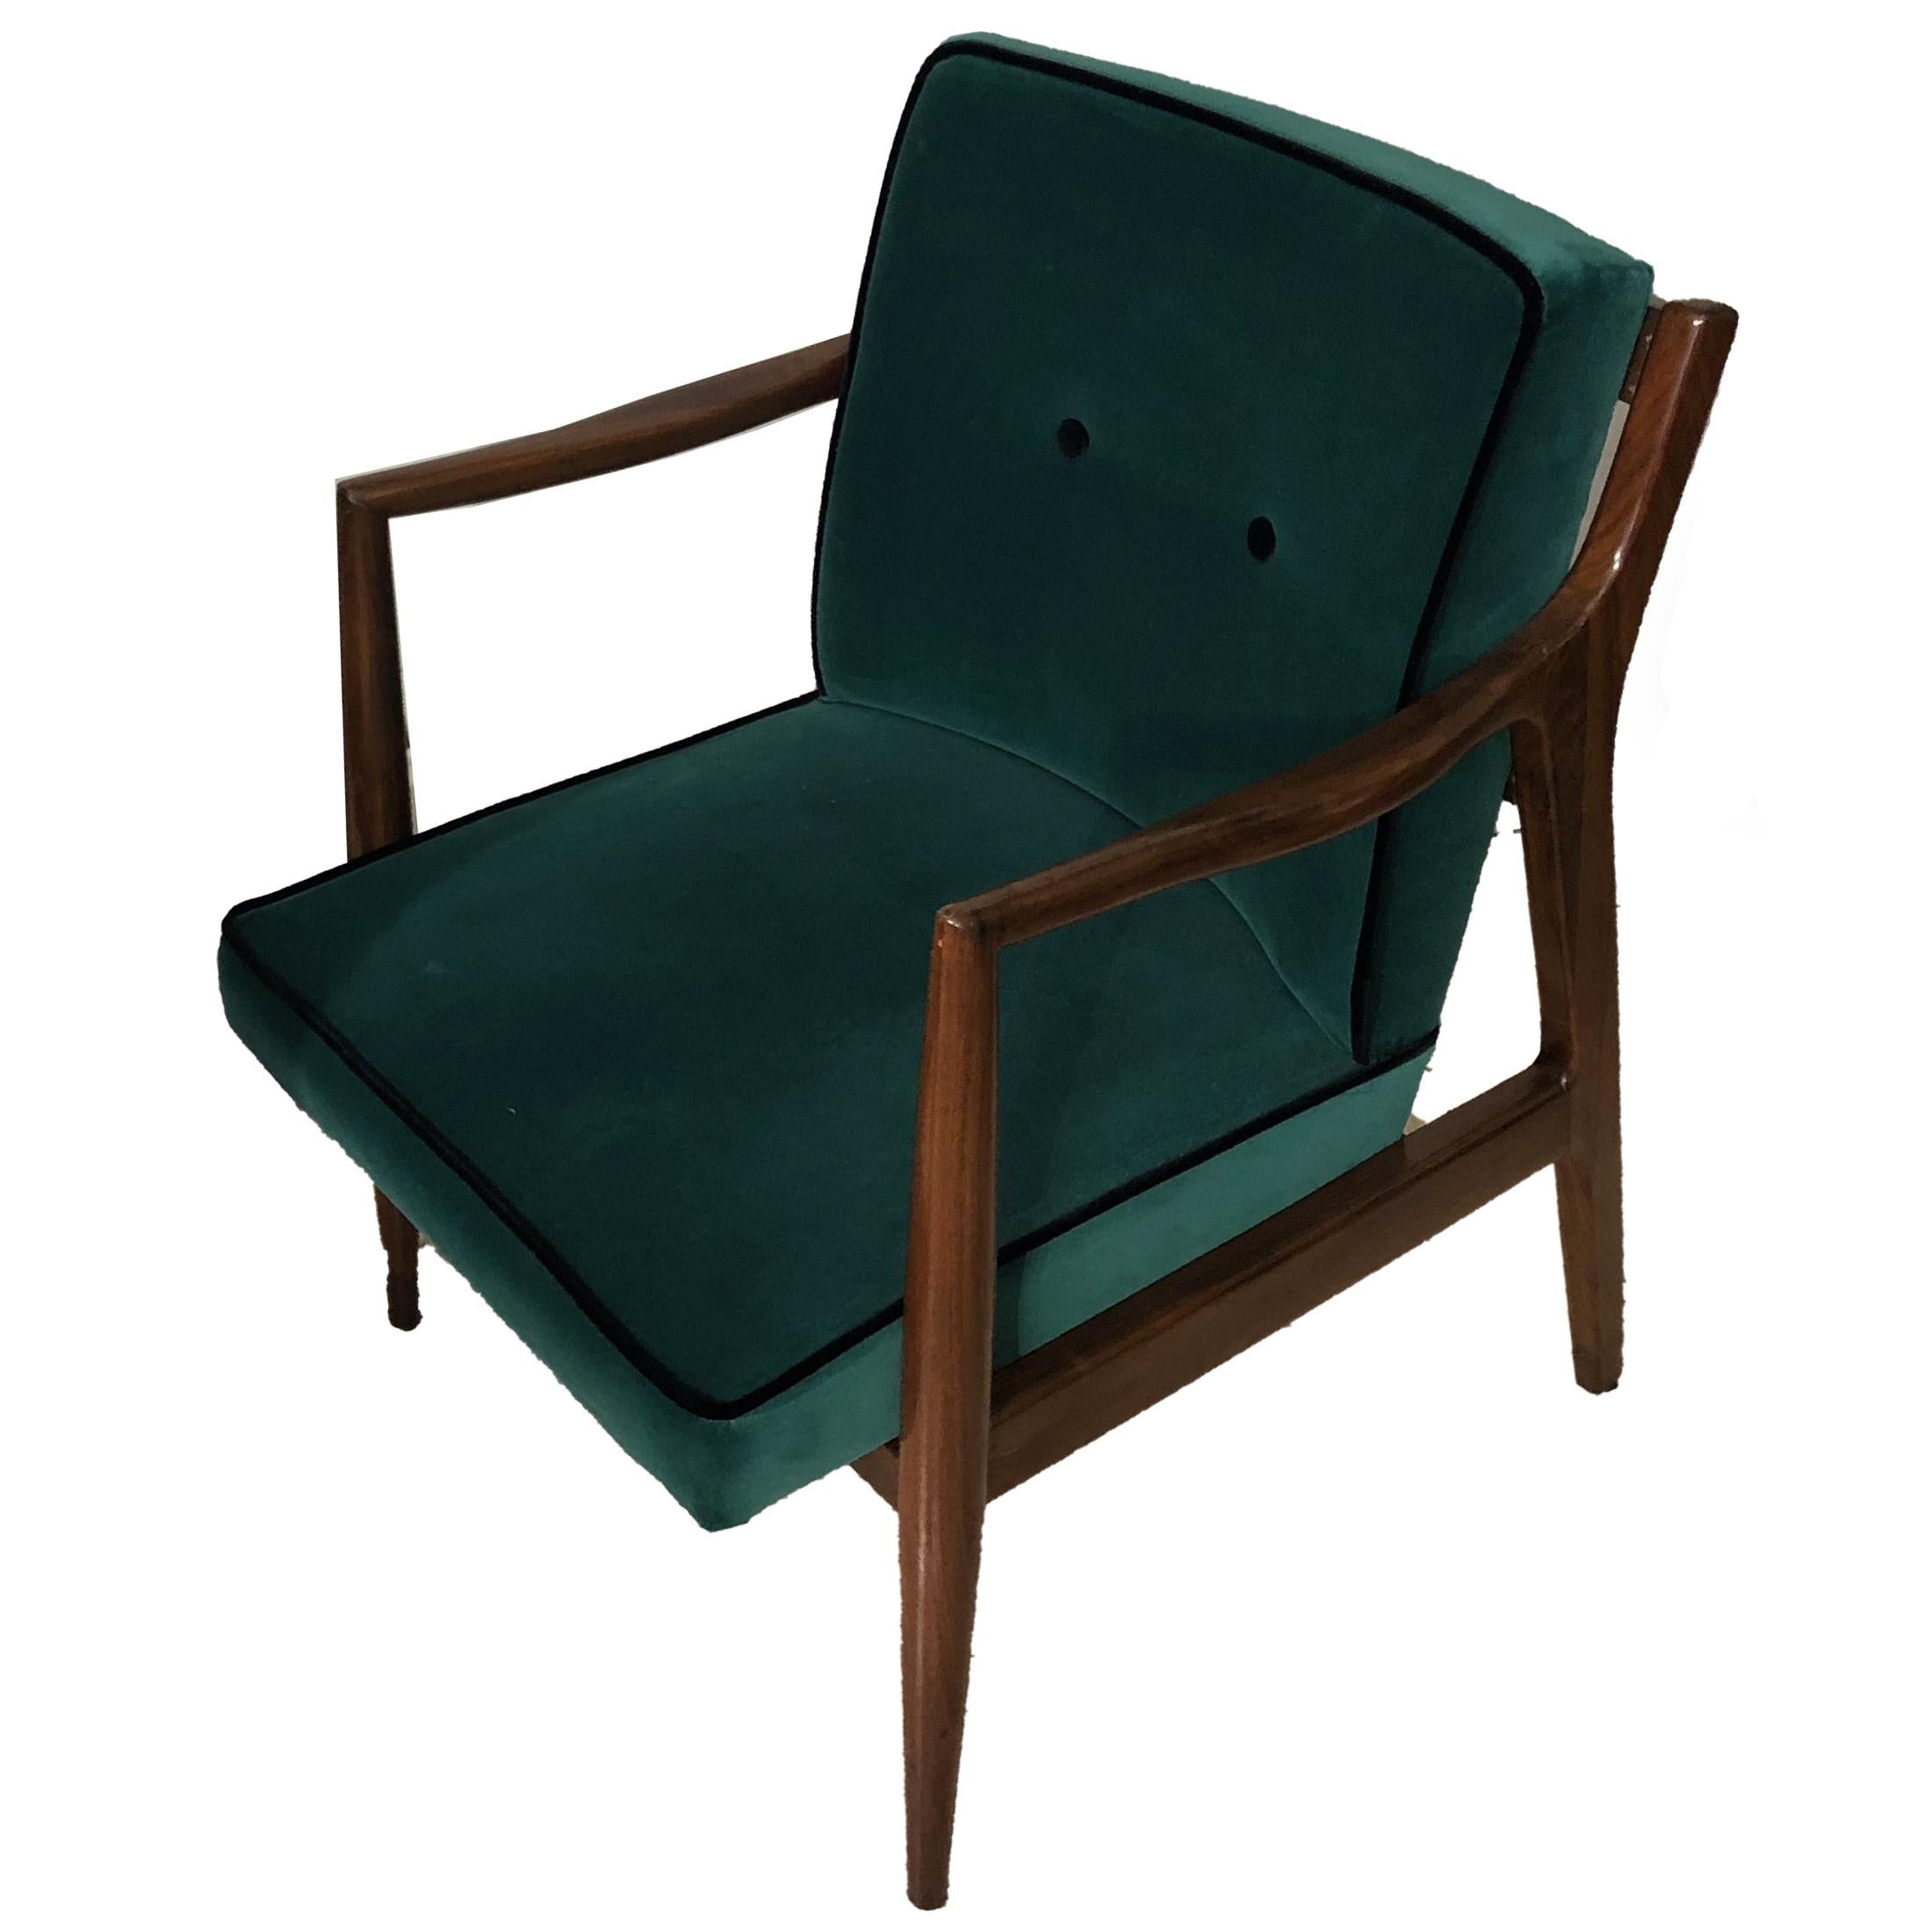 Green velvet mahogany armchairs from France from 1960s period. They have been restored in conservative way with wax finishing and reupholstered with new high quality green velvet and black details and buttons.

Size:

Width and length  60 cm,